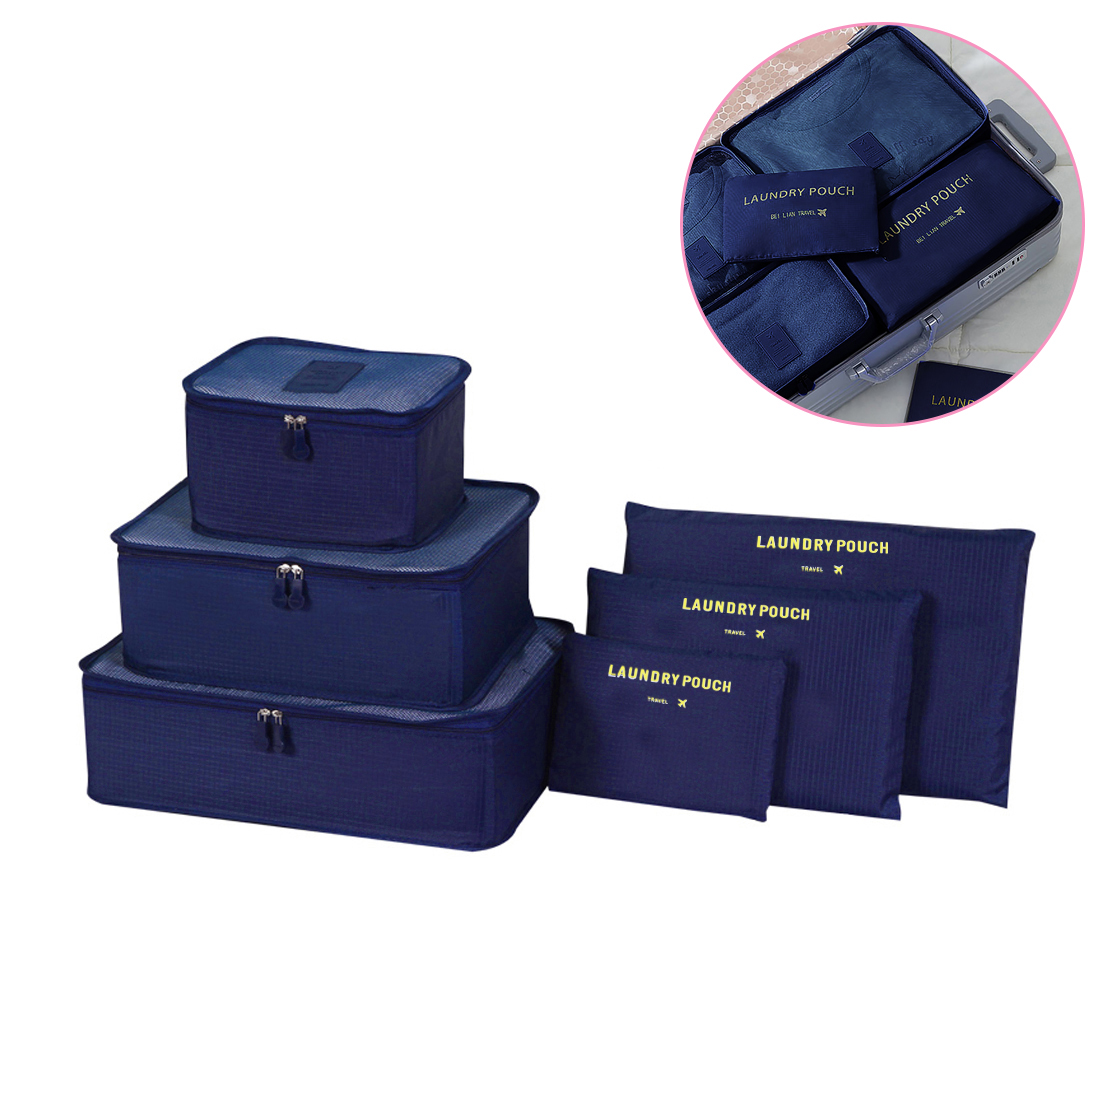 6pcs Waterproof Travel Storage Bags Clothes Packing Cube Luggage Organizer - Dark Blue